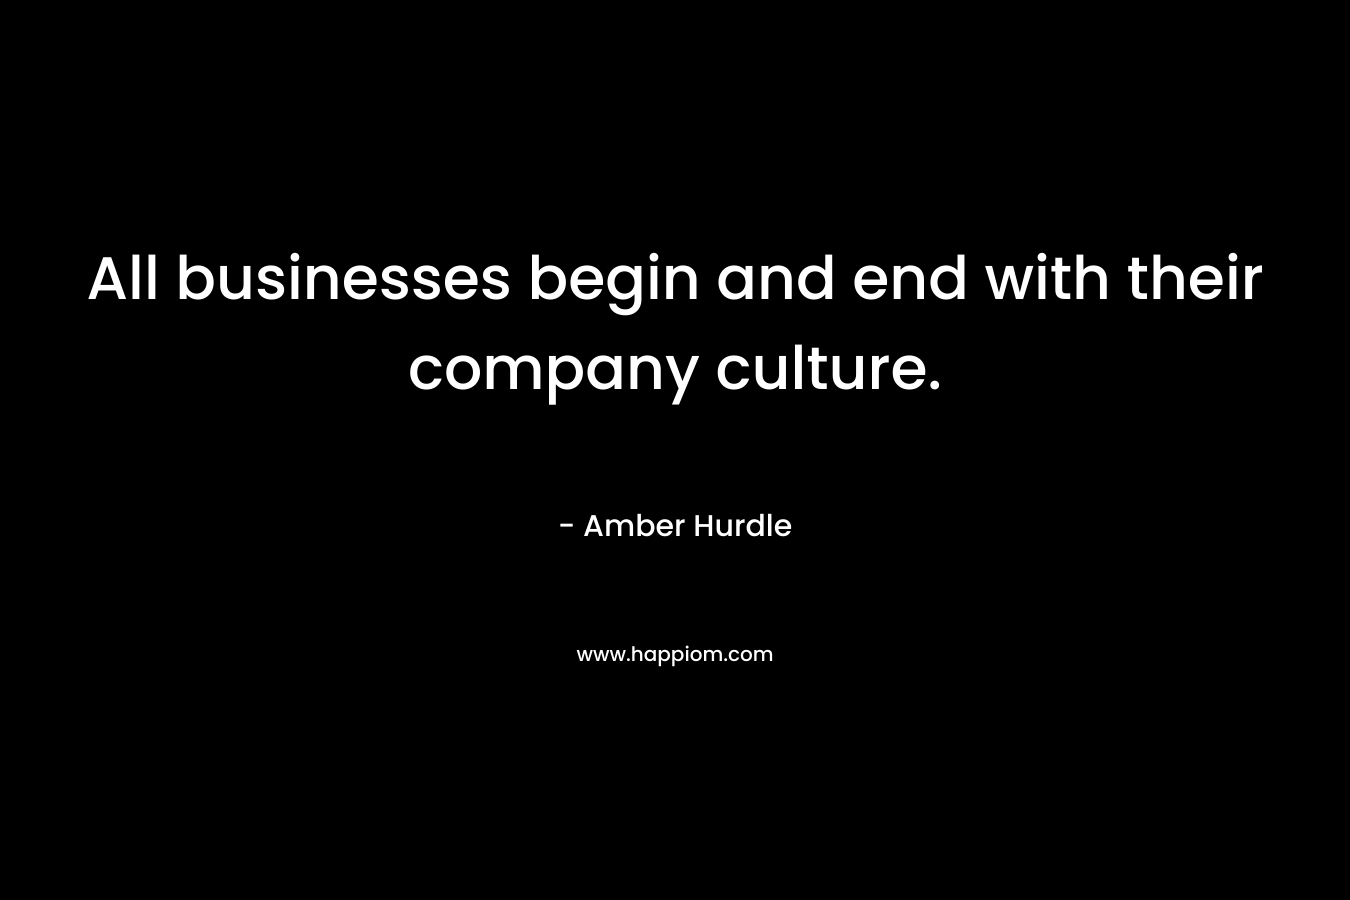 All businesses begin and end with their company culture.